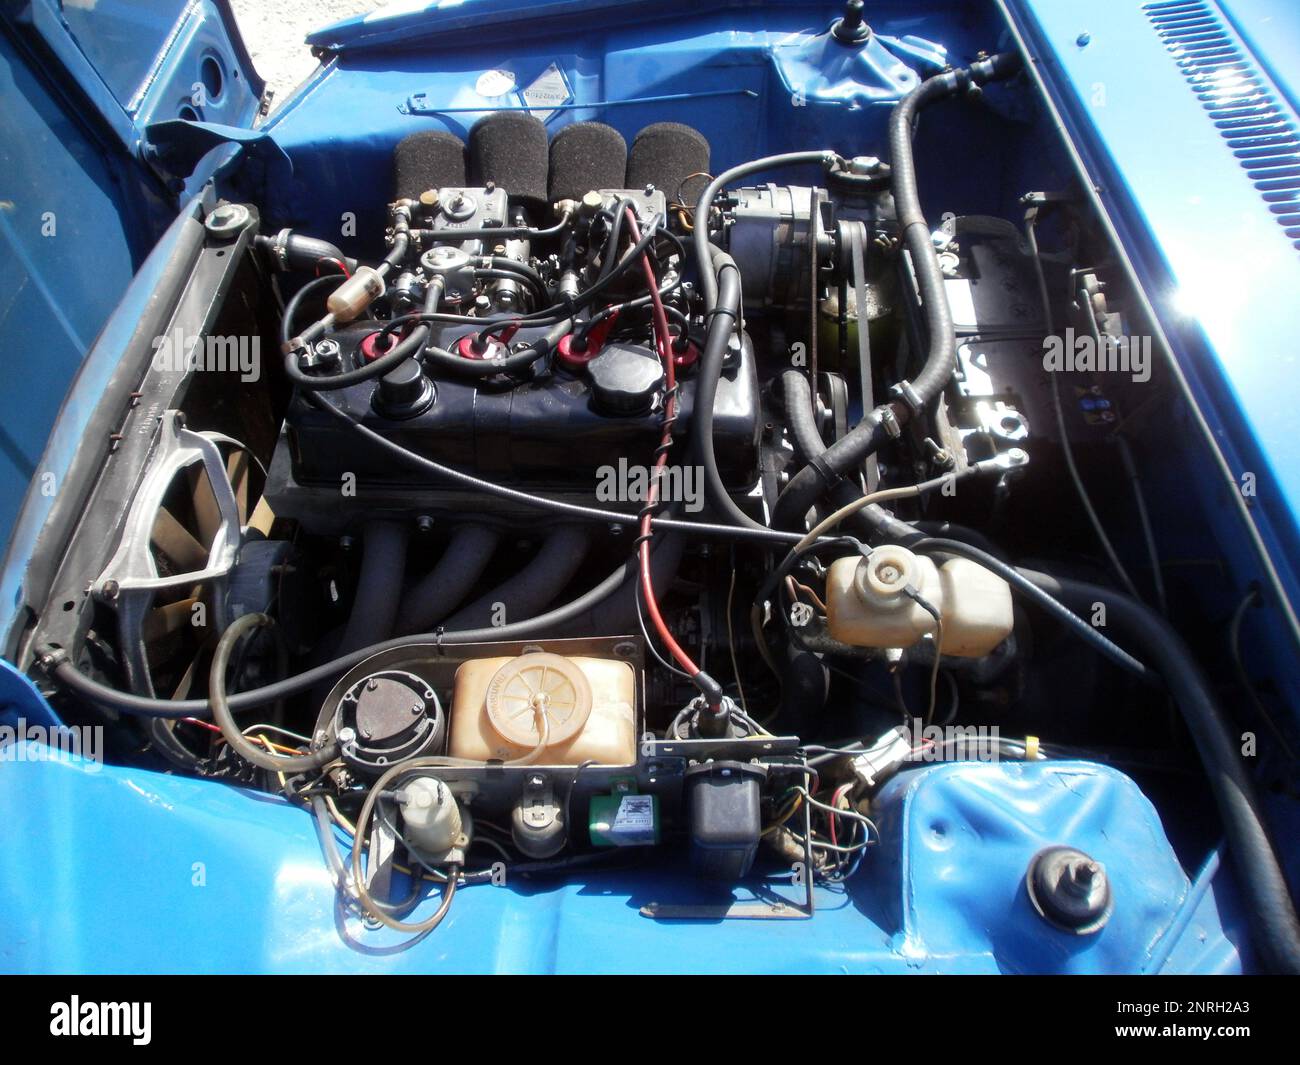 Le Bourget du lac, France - August 19th 2012 : Public exhibition of classic cars. Focus on the engine of a blue Renault Gordini. Stock Photo